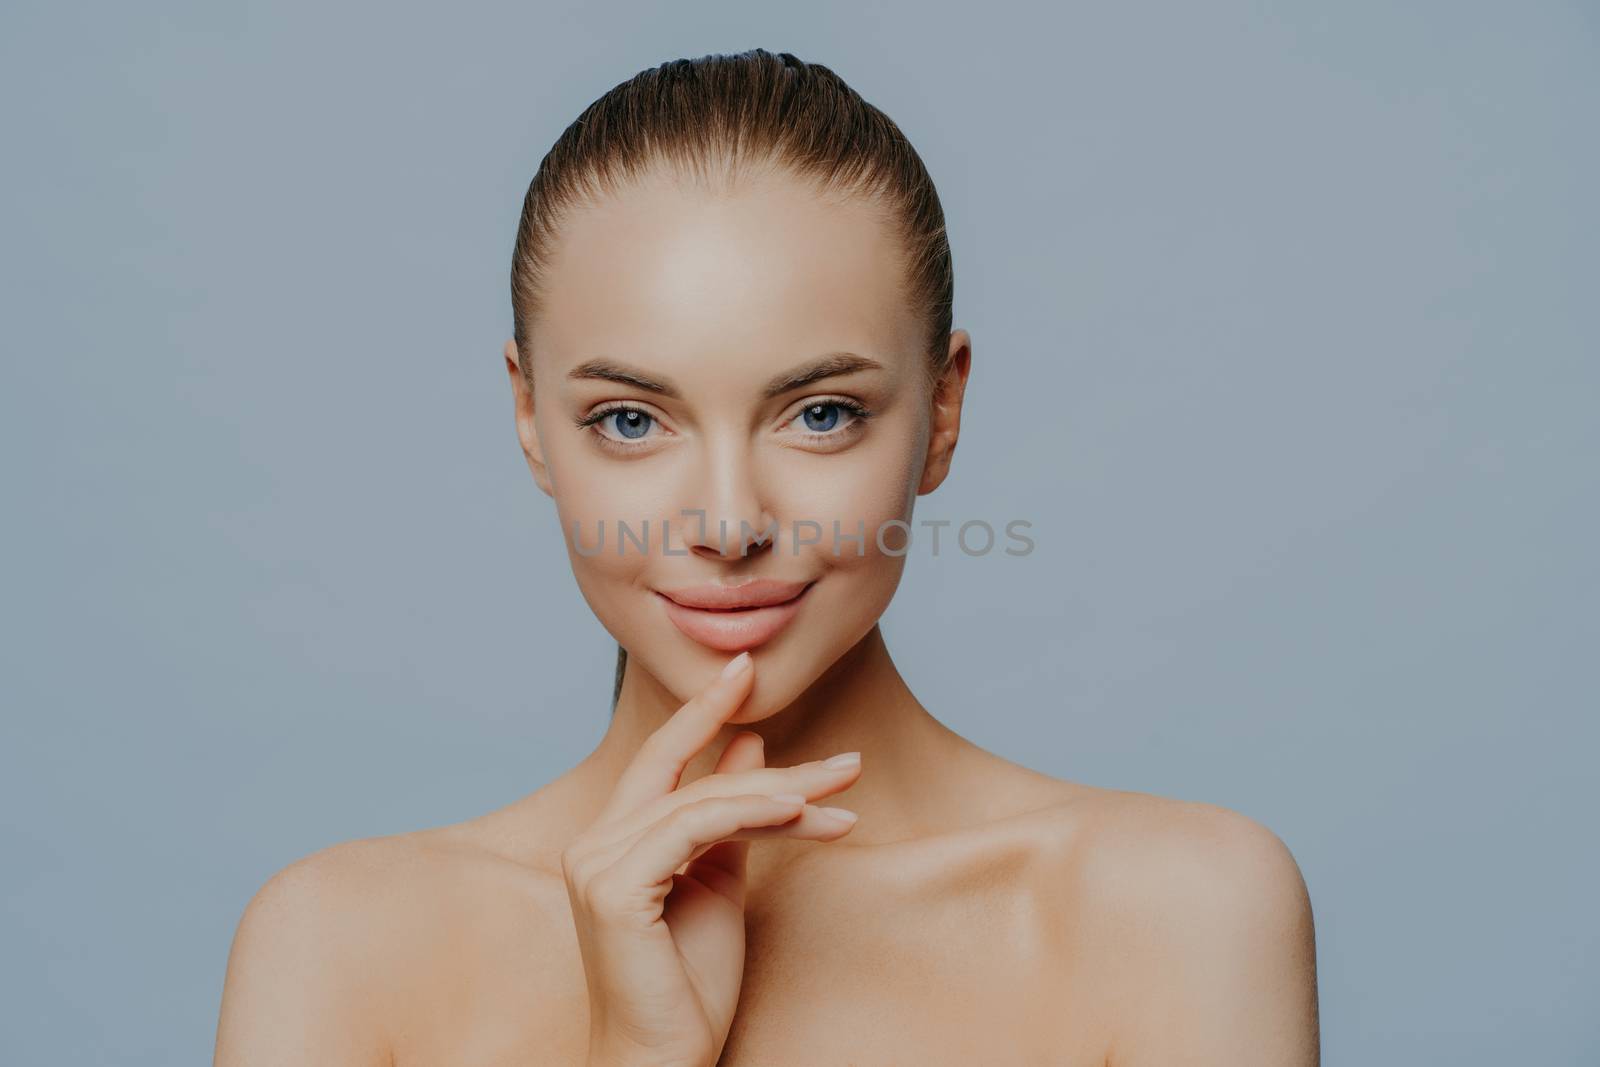 Tender sensual woman with pure healthy skin, has natural magnetic look, feels beautiful and attractive, stands shirtless against blue background, enjoys herself after spa procedures. Beauty care by vkstock